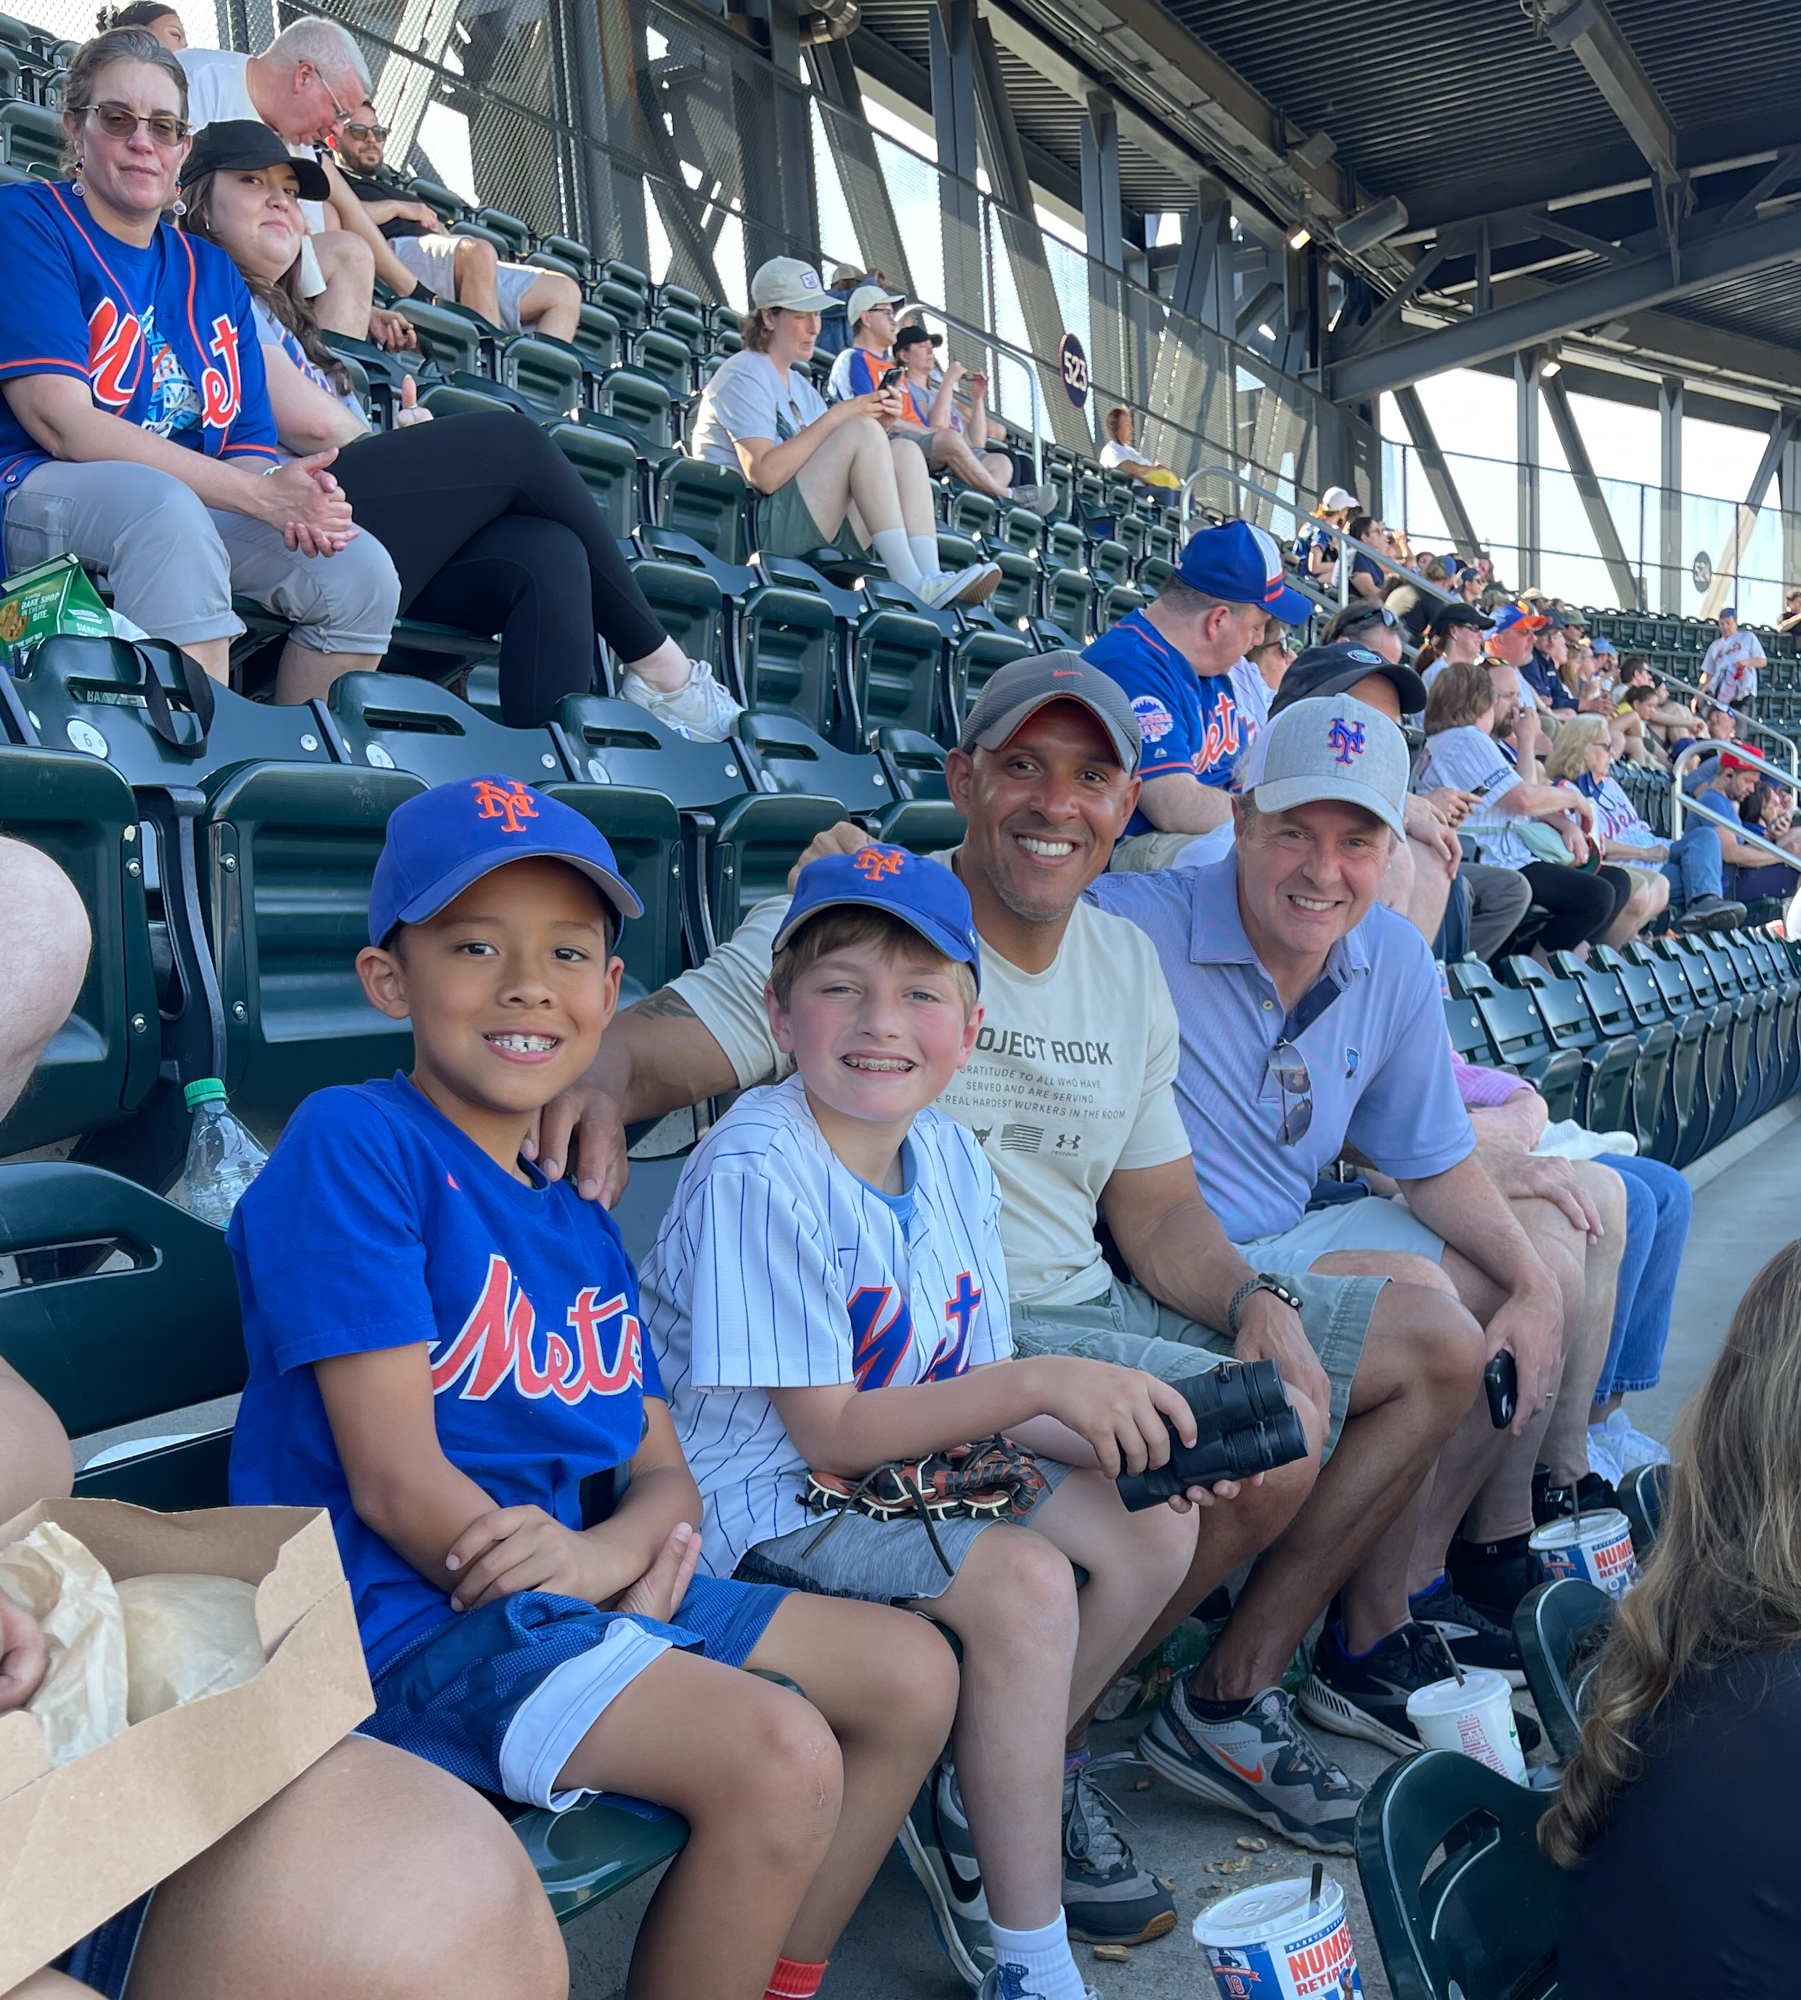 Post-Event Recap: NY x Central Jersey Carolina Clubs – Mets Baseball Outing